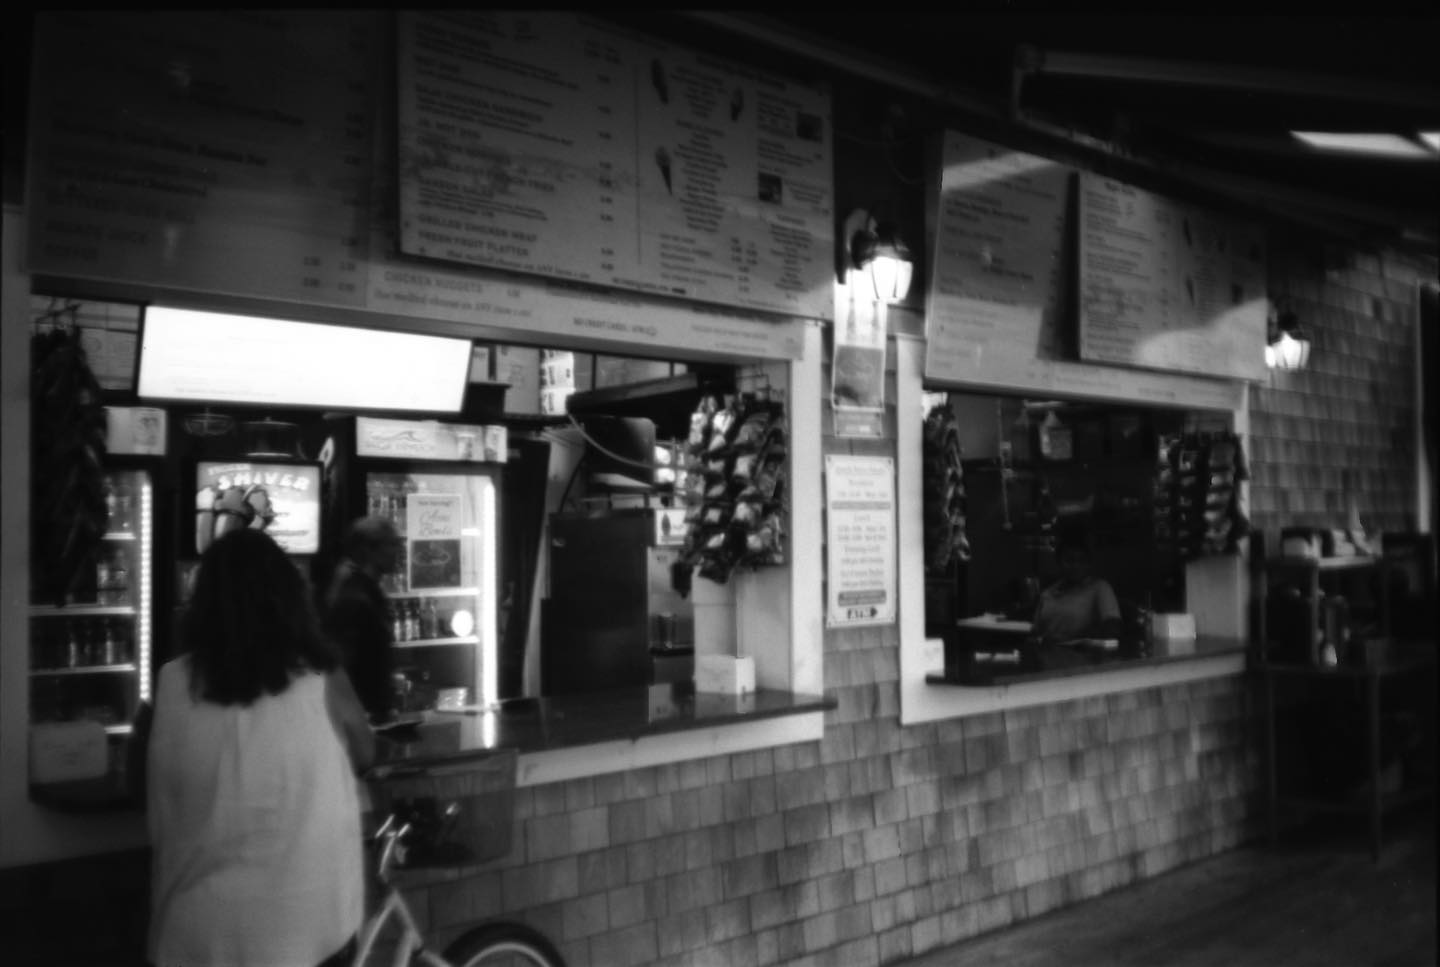 Snacks stand. Shot last night on the boardwalk in Avon-by-the-Sea, New Jersey, with my #olympusxa on @filmferrania #p30film. Developed this morning in my @arsimago #labbox. And this time, I put the reel together correctly, and didnât lose a single shot to film touching. I think I found the problem. #film #filmphotography #shootfilmstaybroke